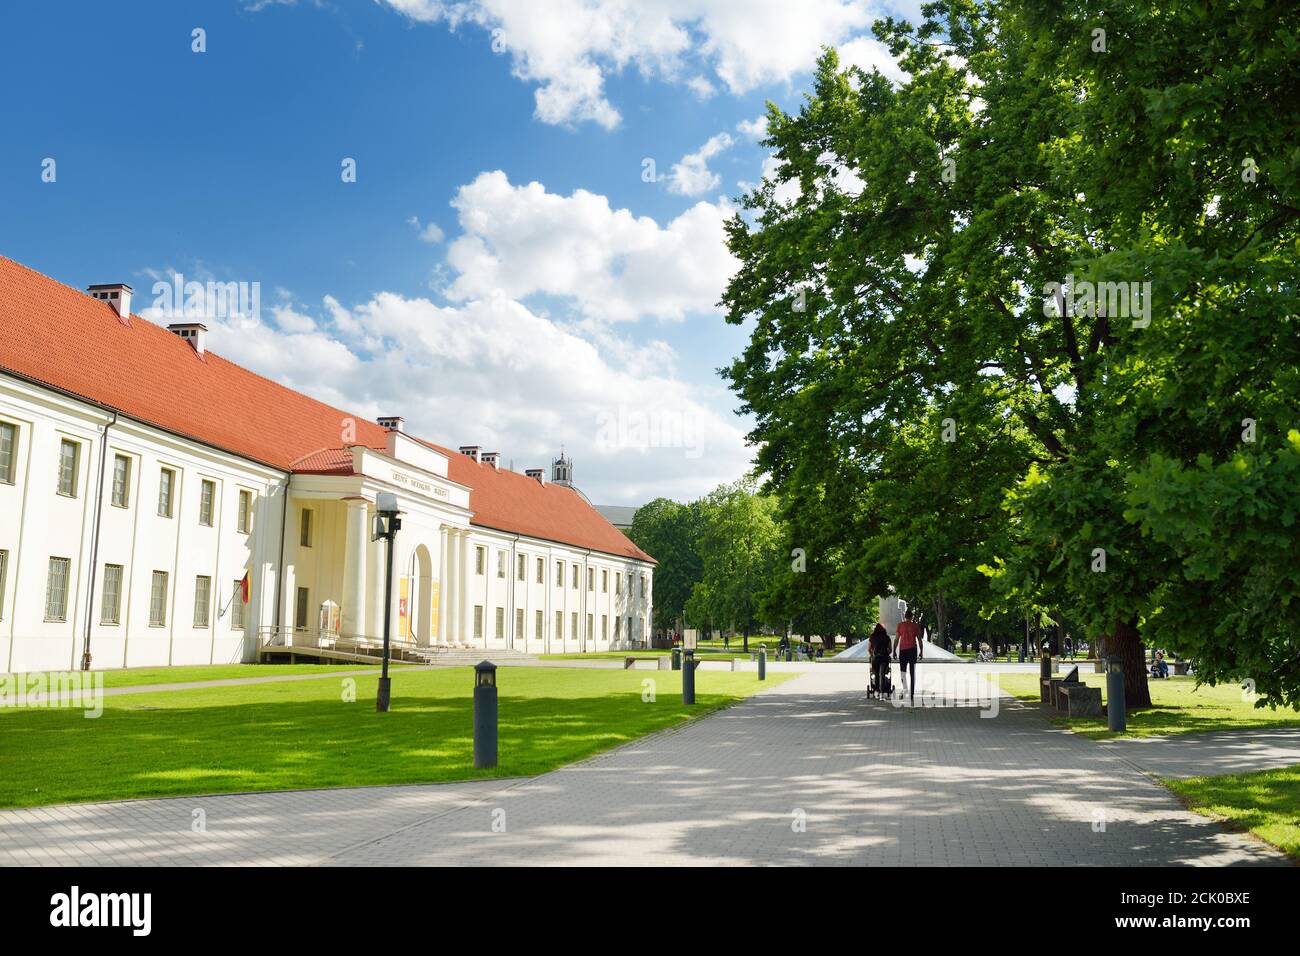 VILNIUS, LITHUANIA - JULY 14, 2020: People walking down the streets of Vilnius Old Town. Beautiful sunny summer day in the capital of Lithuania. Stock Photo